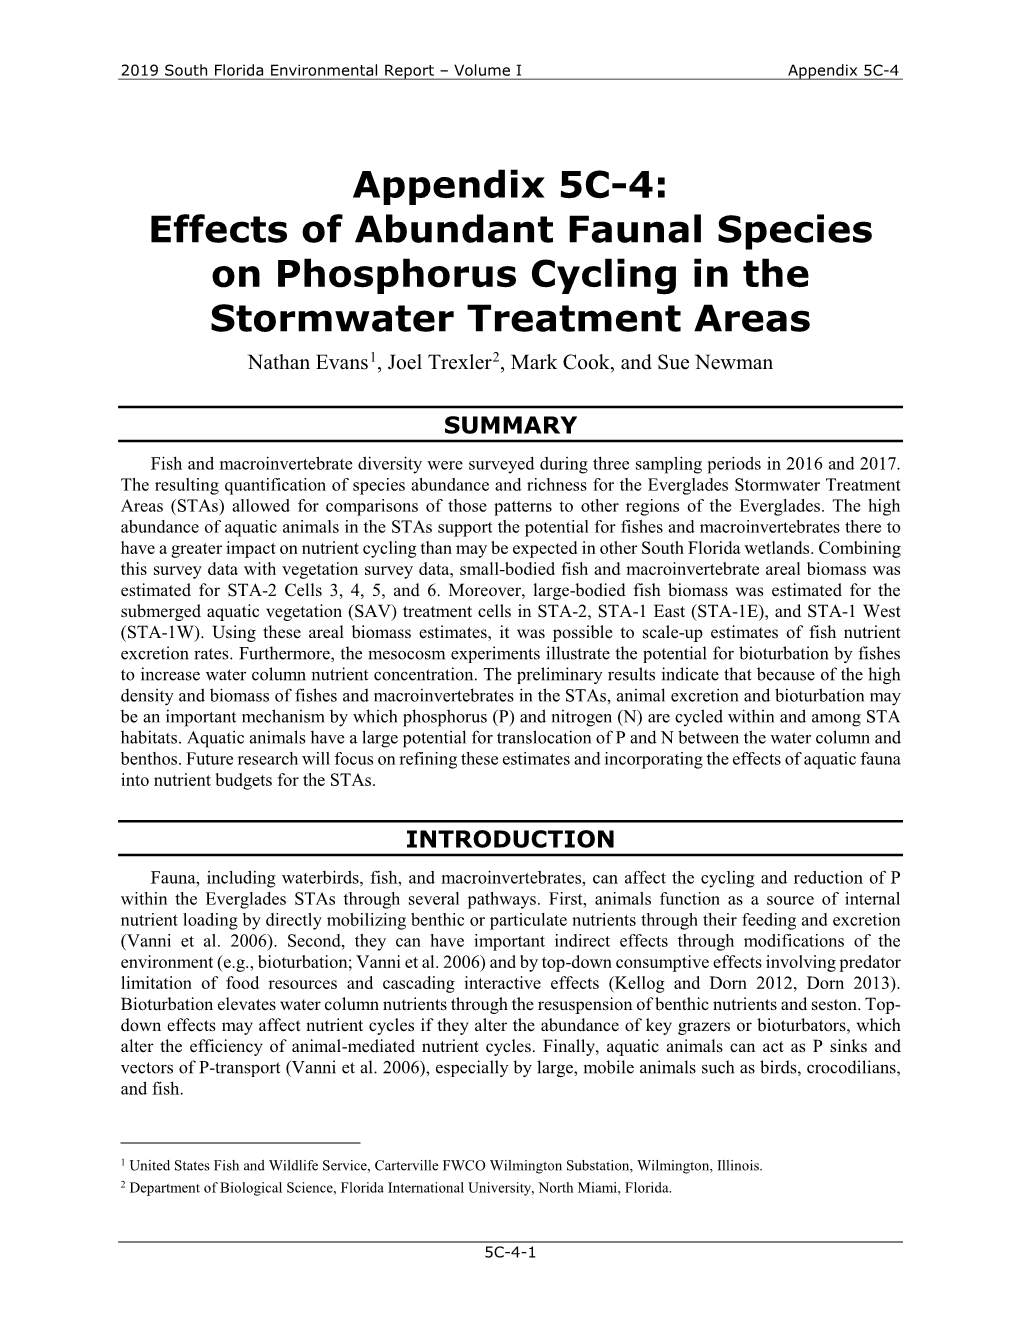 Effects of Abundant Faunal Species on Phosphorus Cycling in the Stormwater Treatment Areas Nathan Evans1, Joel Trexler2, Mark Cook, and Sue Newman